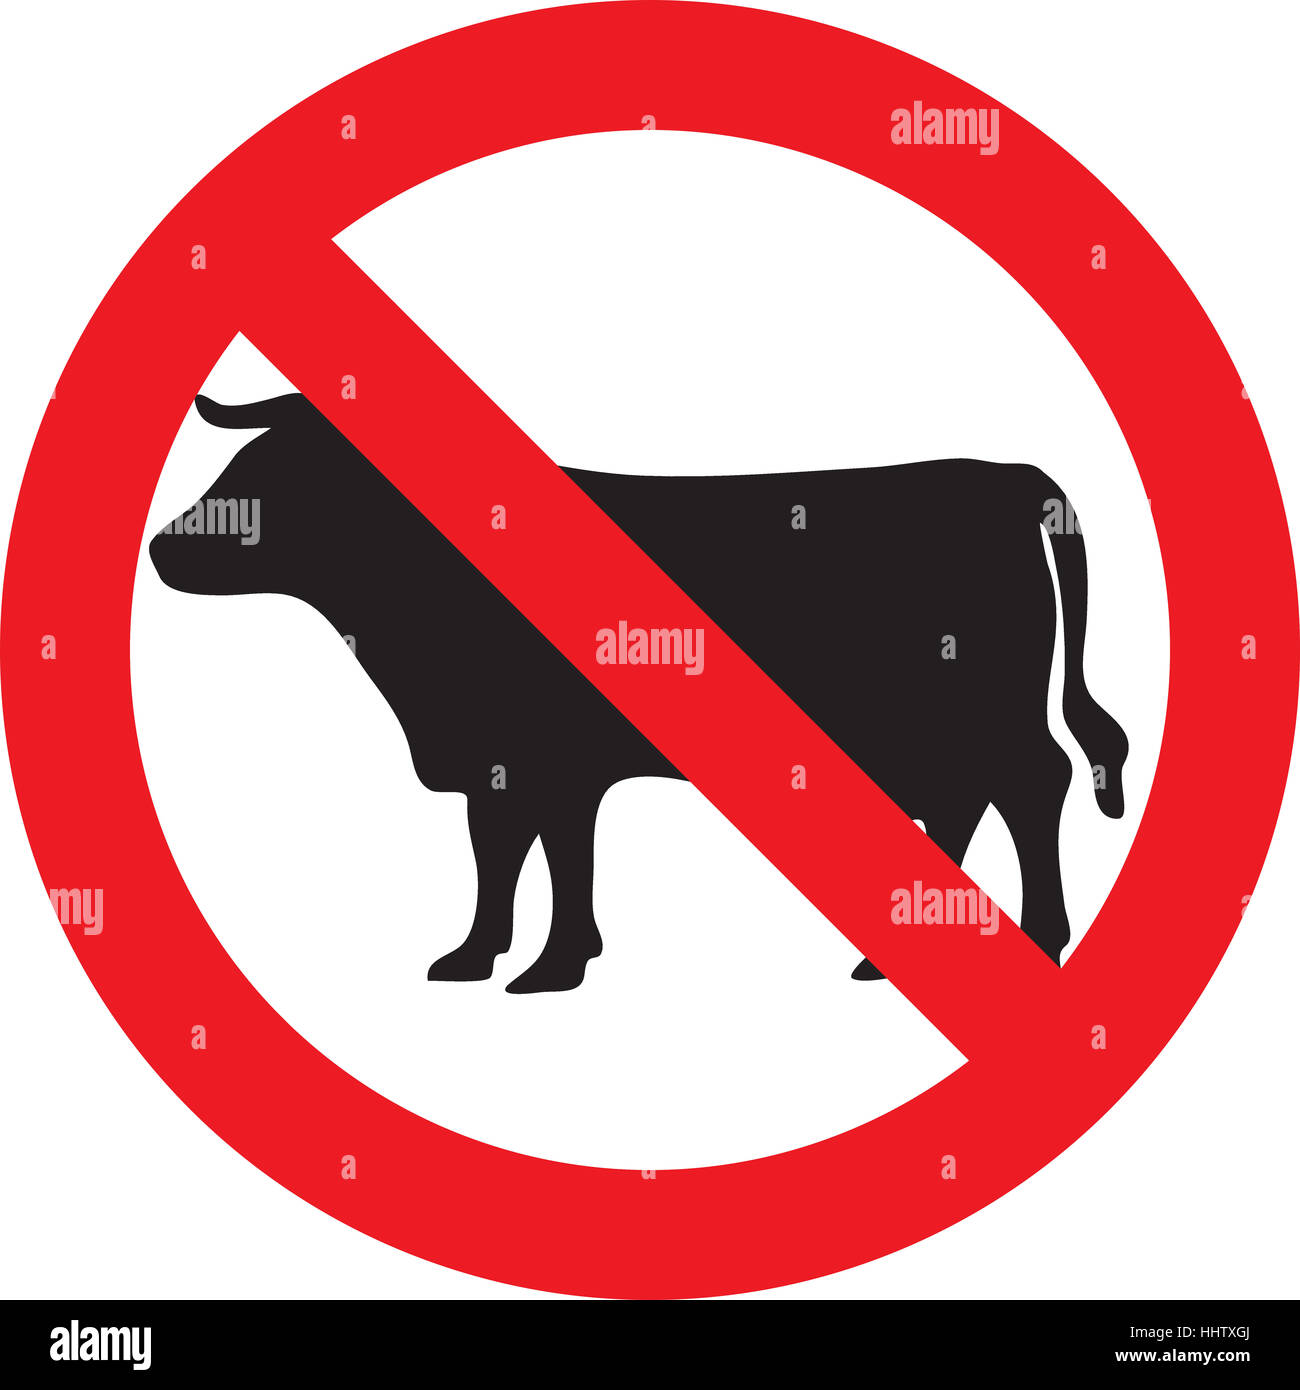 No meat allowed sign Stock Photo